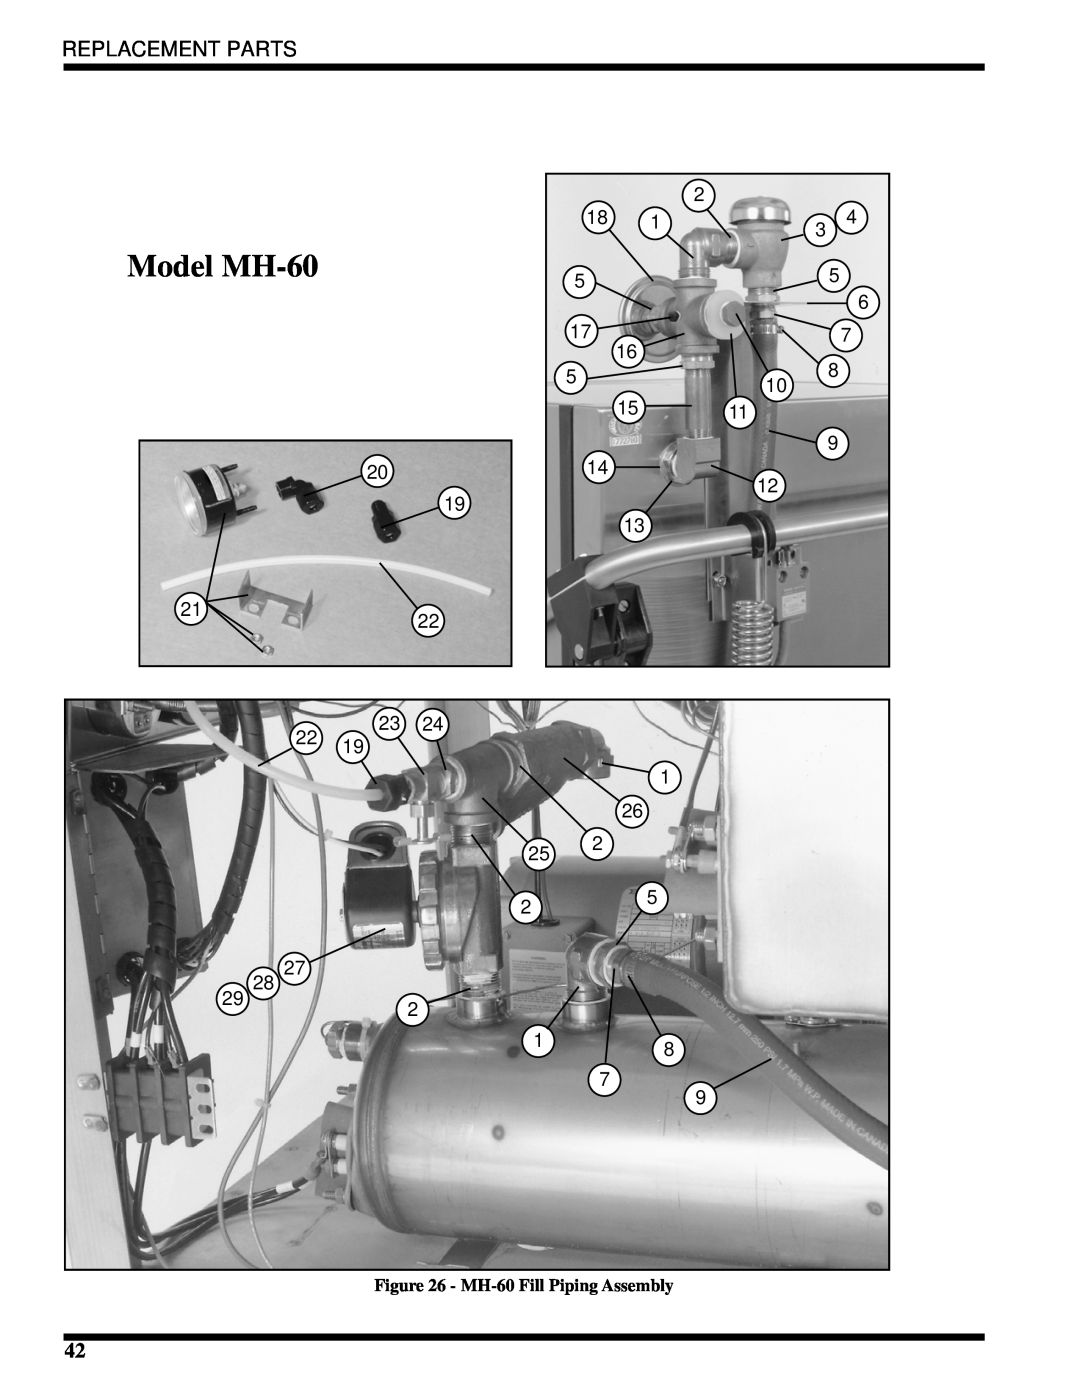 Moyer Diebel MH-6LM2, MH-6NM2, MH-60M2 technical manual Model MH-60, Replacement Parts, MH-60 Fill Piping Assembly 